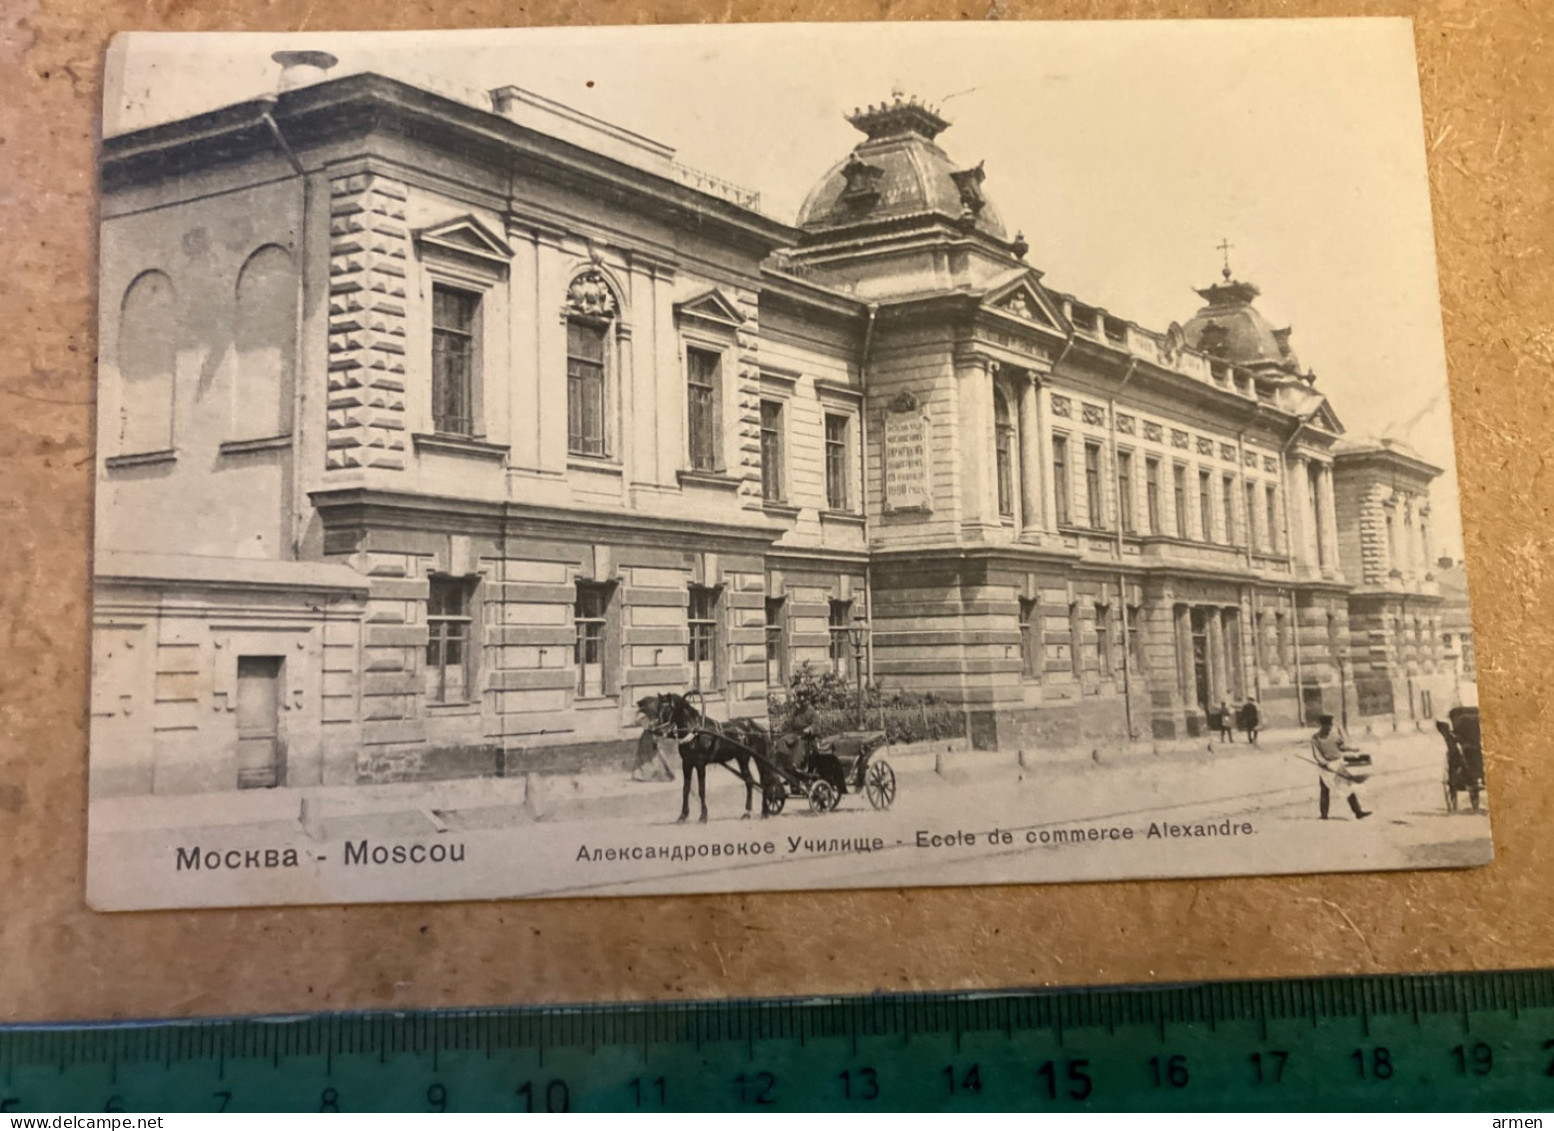 Cpa Russie Russia Moscou Moskba Moscow - École De Commerce Alexandre 1911 - Russia